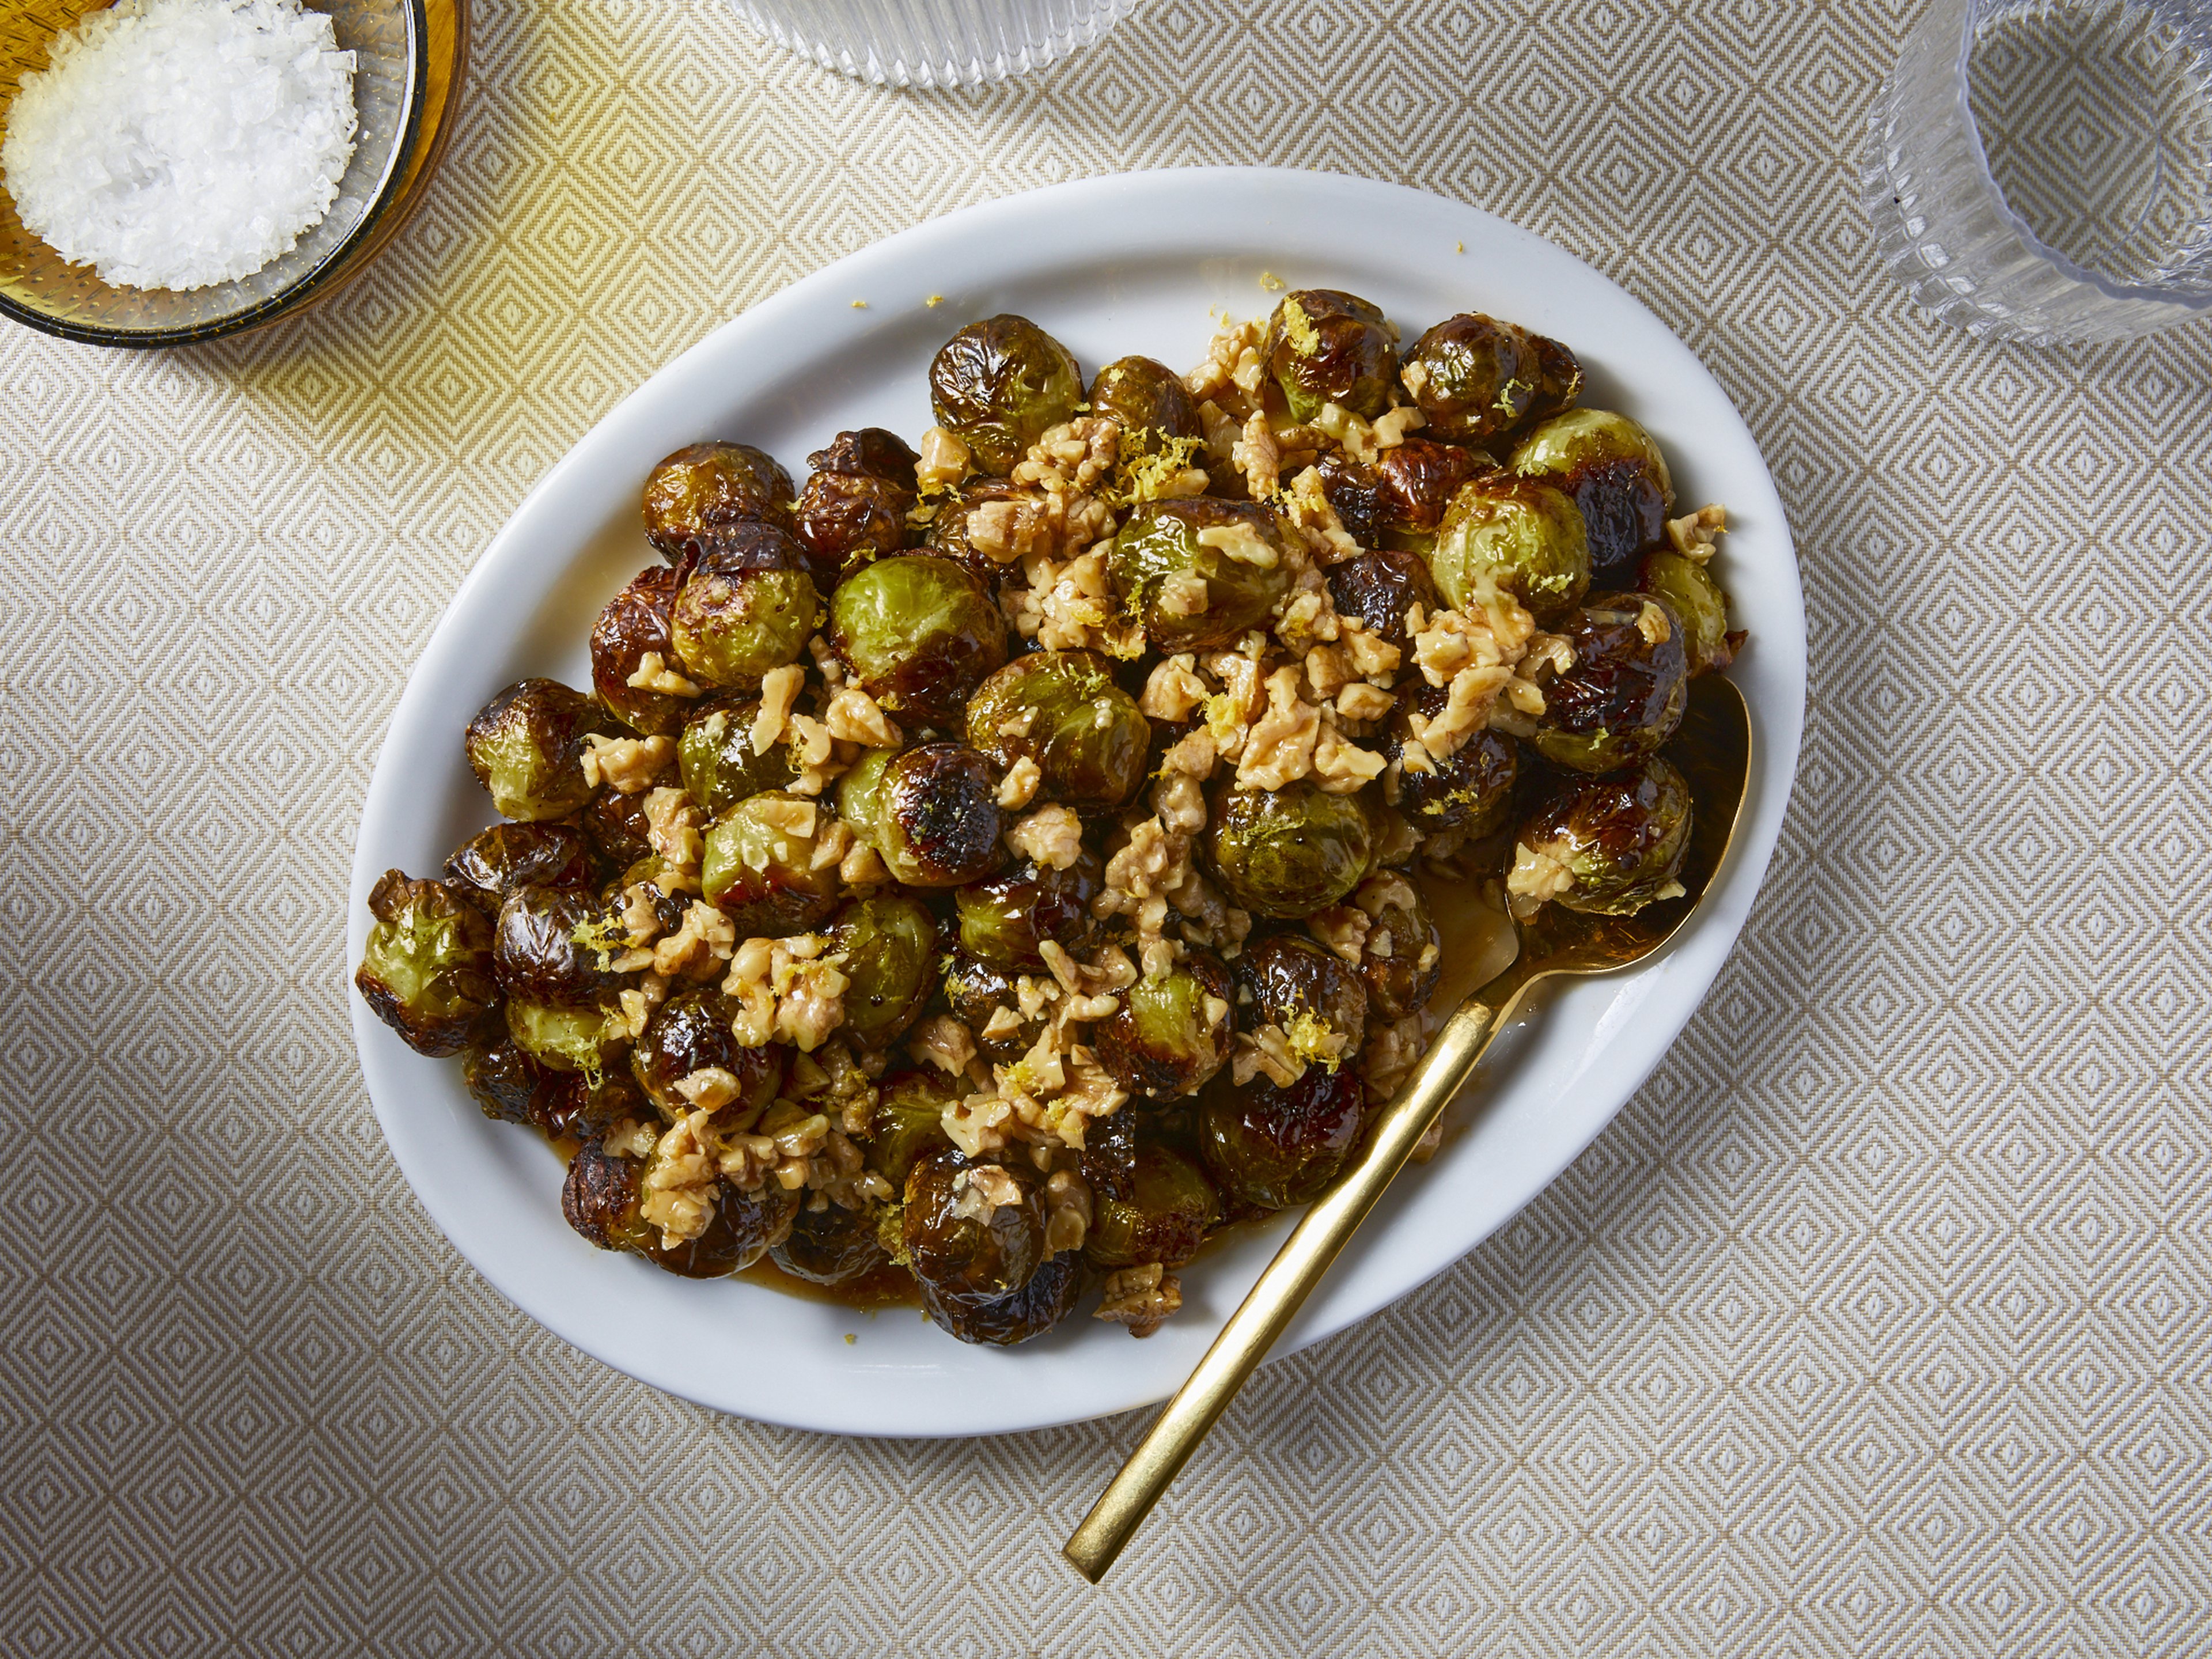 Roasted Brussels sprouts with walnuts and honey glaze